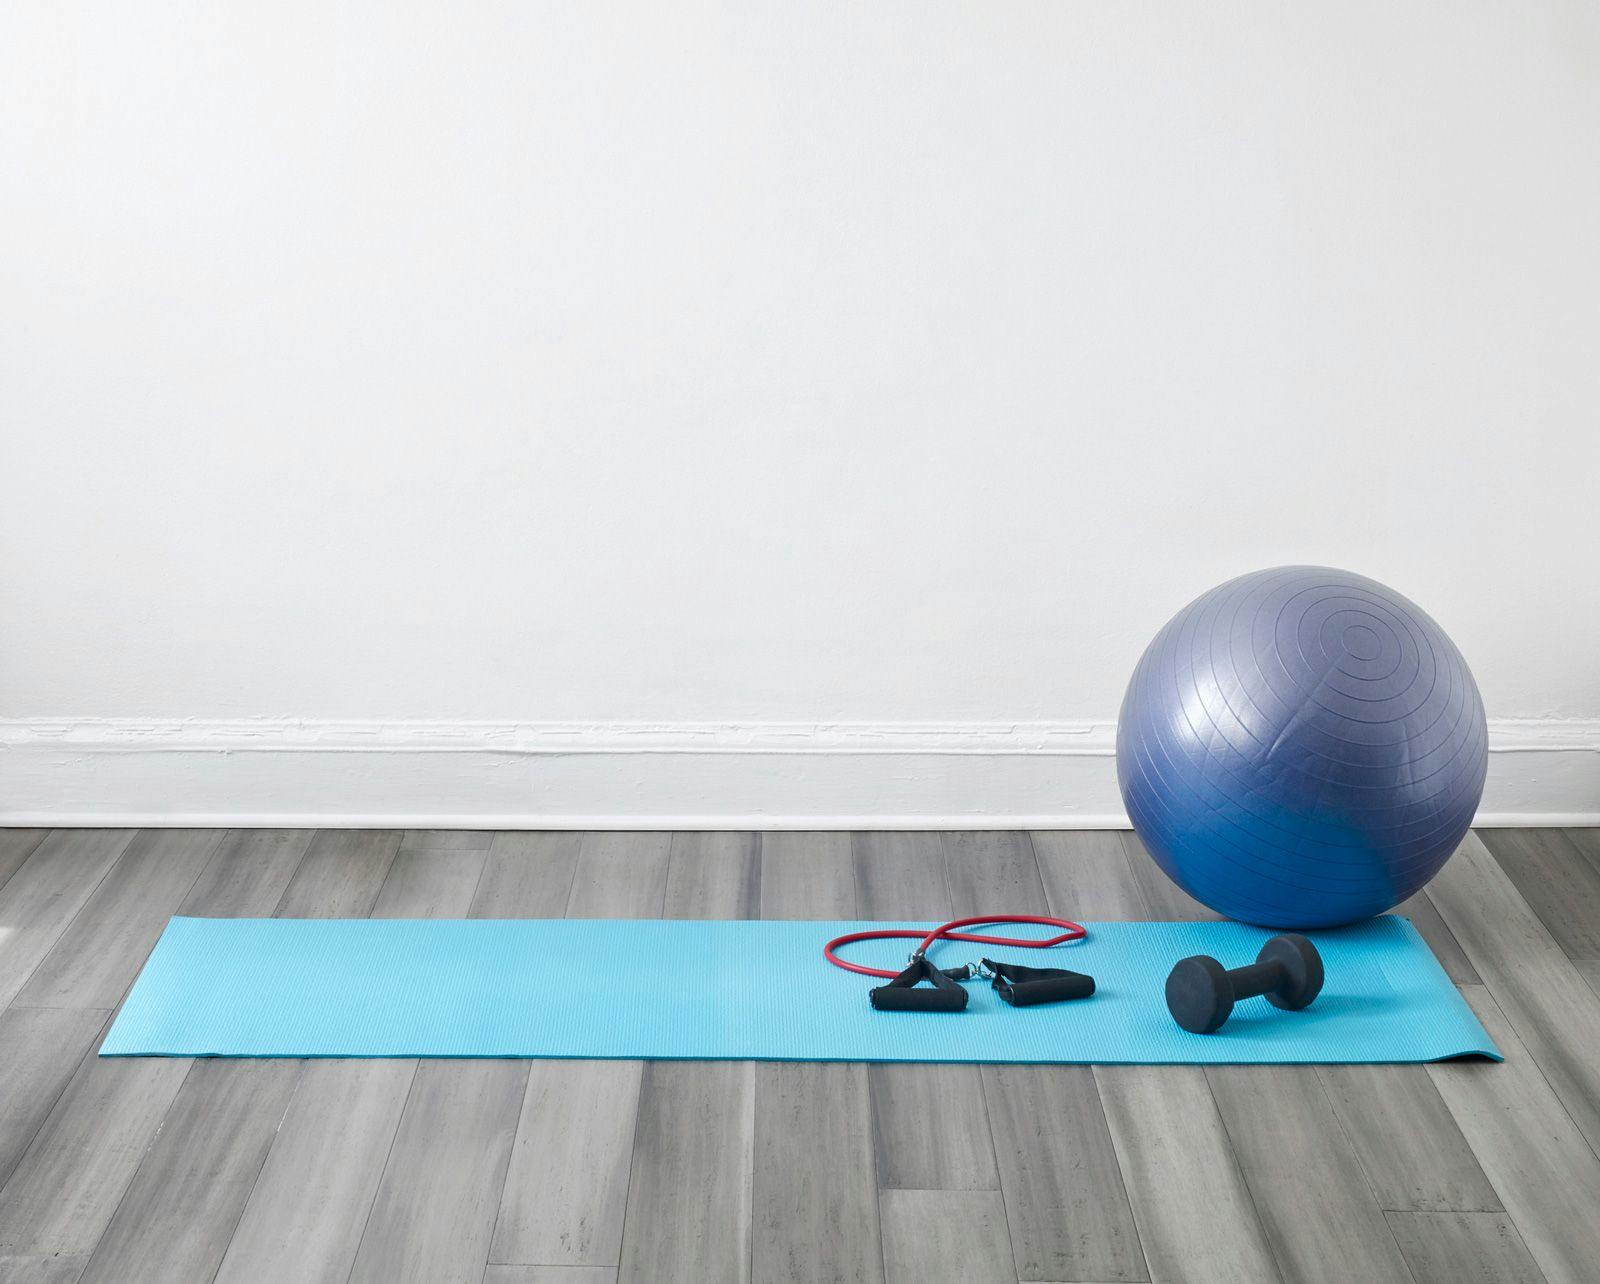 Gym equipment including a blue yoga mat, inflatable balance ball and dumbbells 